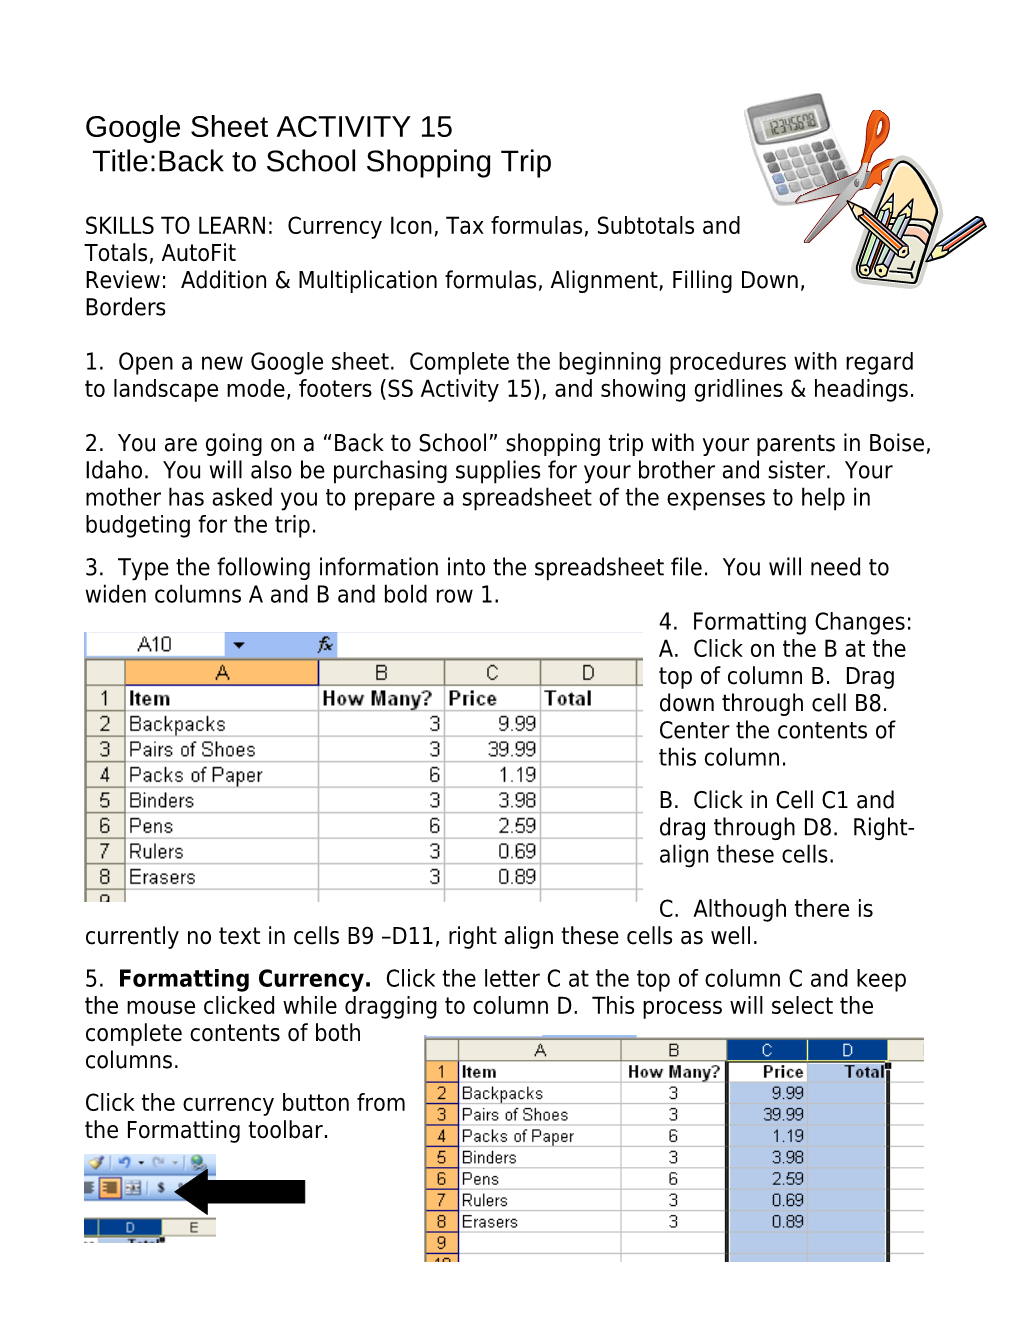 SKILLS to LEARN: Currency Icon, Tax Formulas, Subtotals and Totals, Autofit